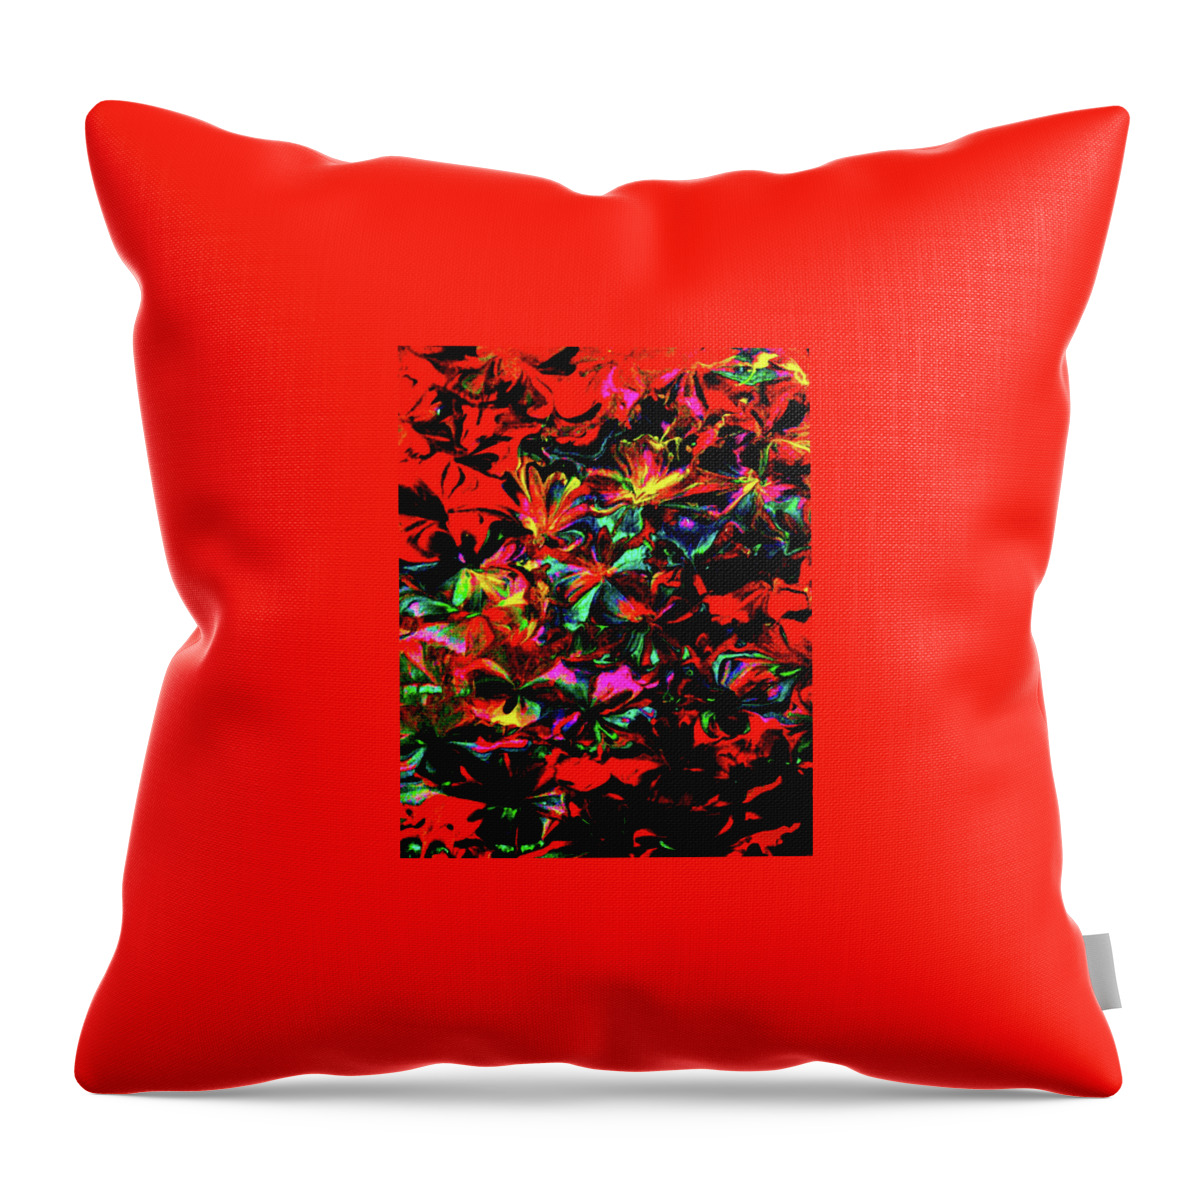 Red Throw Pillow featuring the painting Petals Of Red by Anna Adams